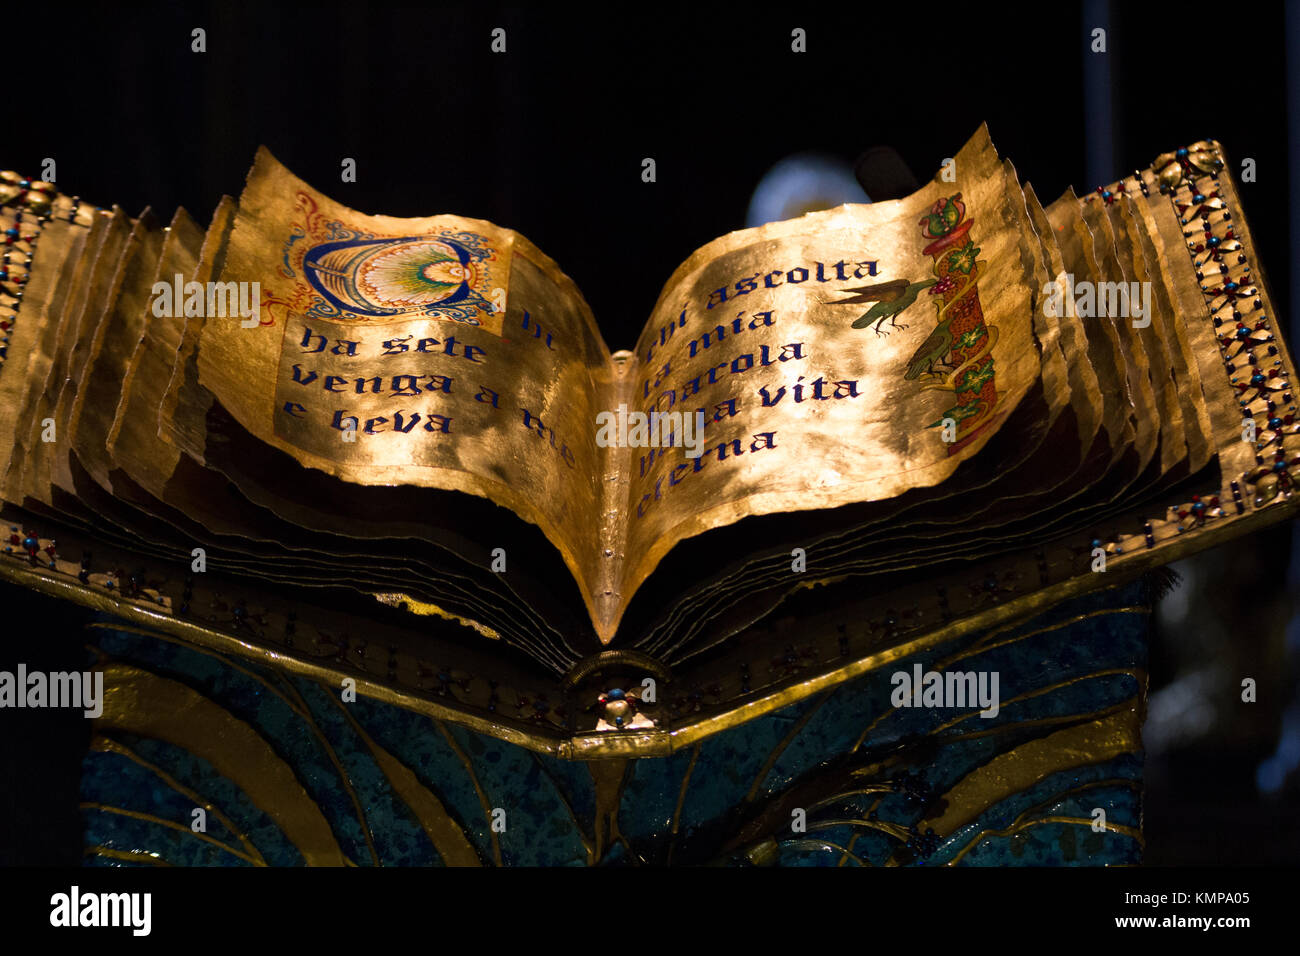 A golden book with inscriptions in Latin and designs. Stock Photo